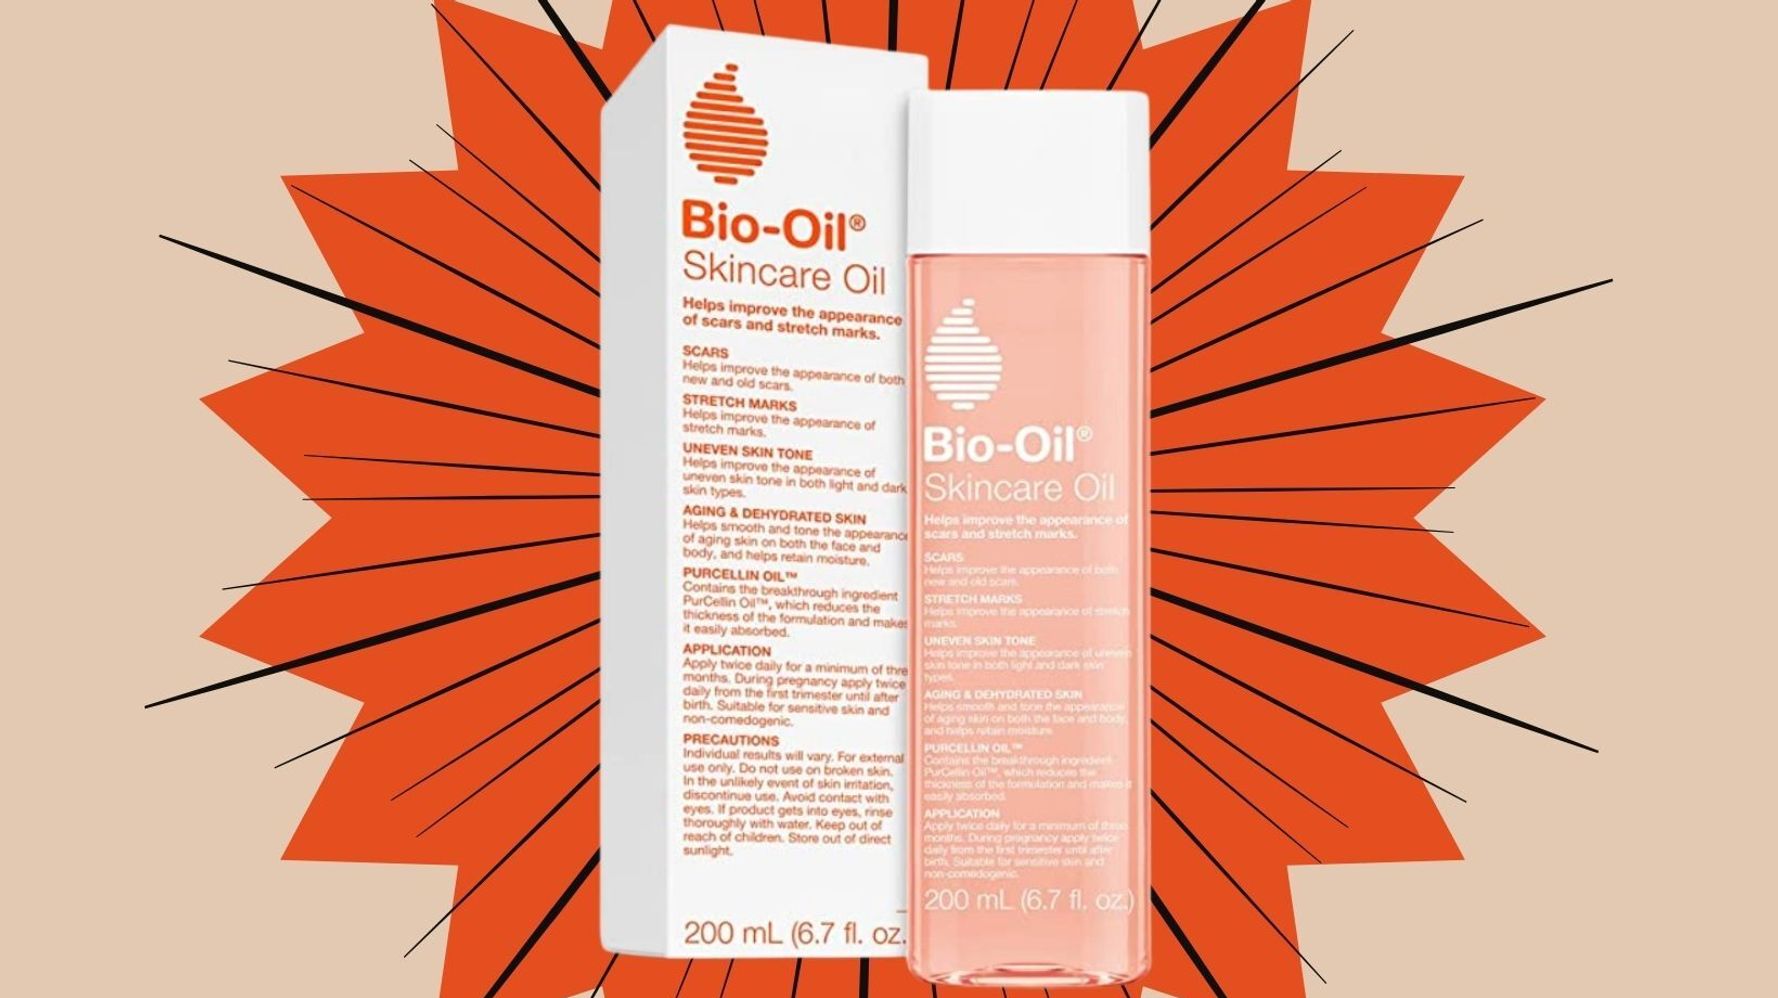 Can You Use Bio-Oil on Your Face?